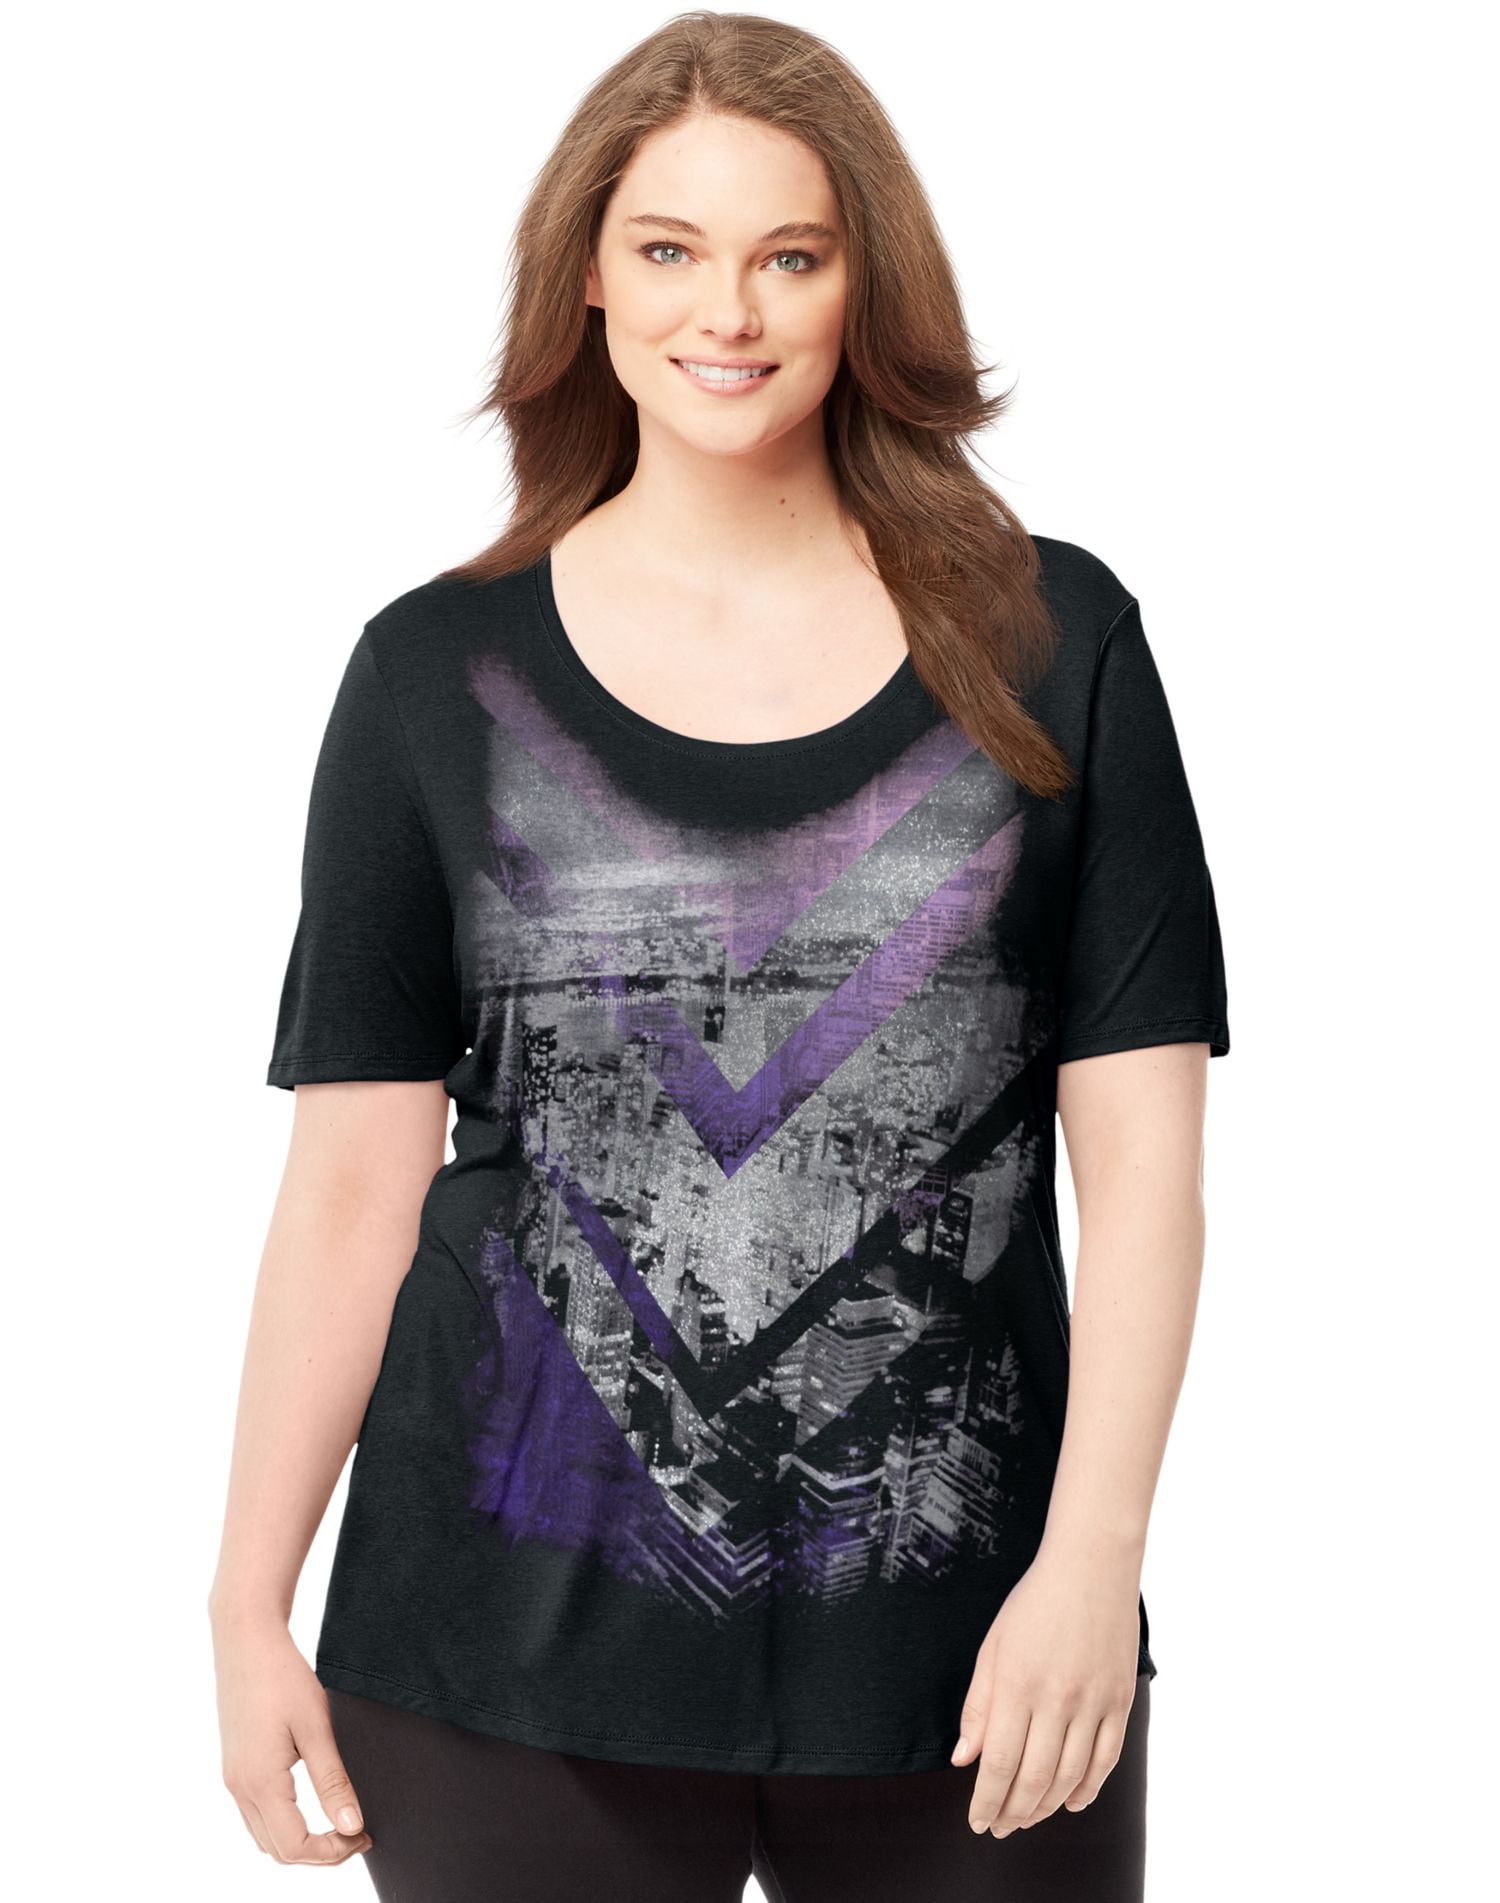 just-my-size-by-hanes-women-s-plus-size-short-sleeve-scoop-neck-graphic-t-shirt-walmart